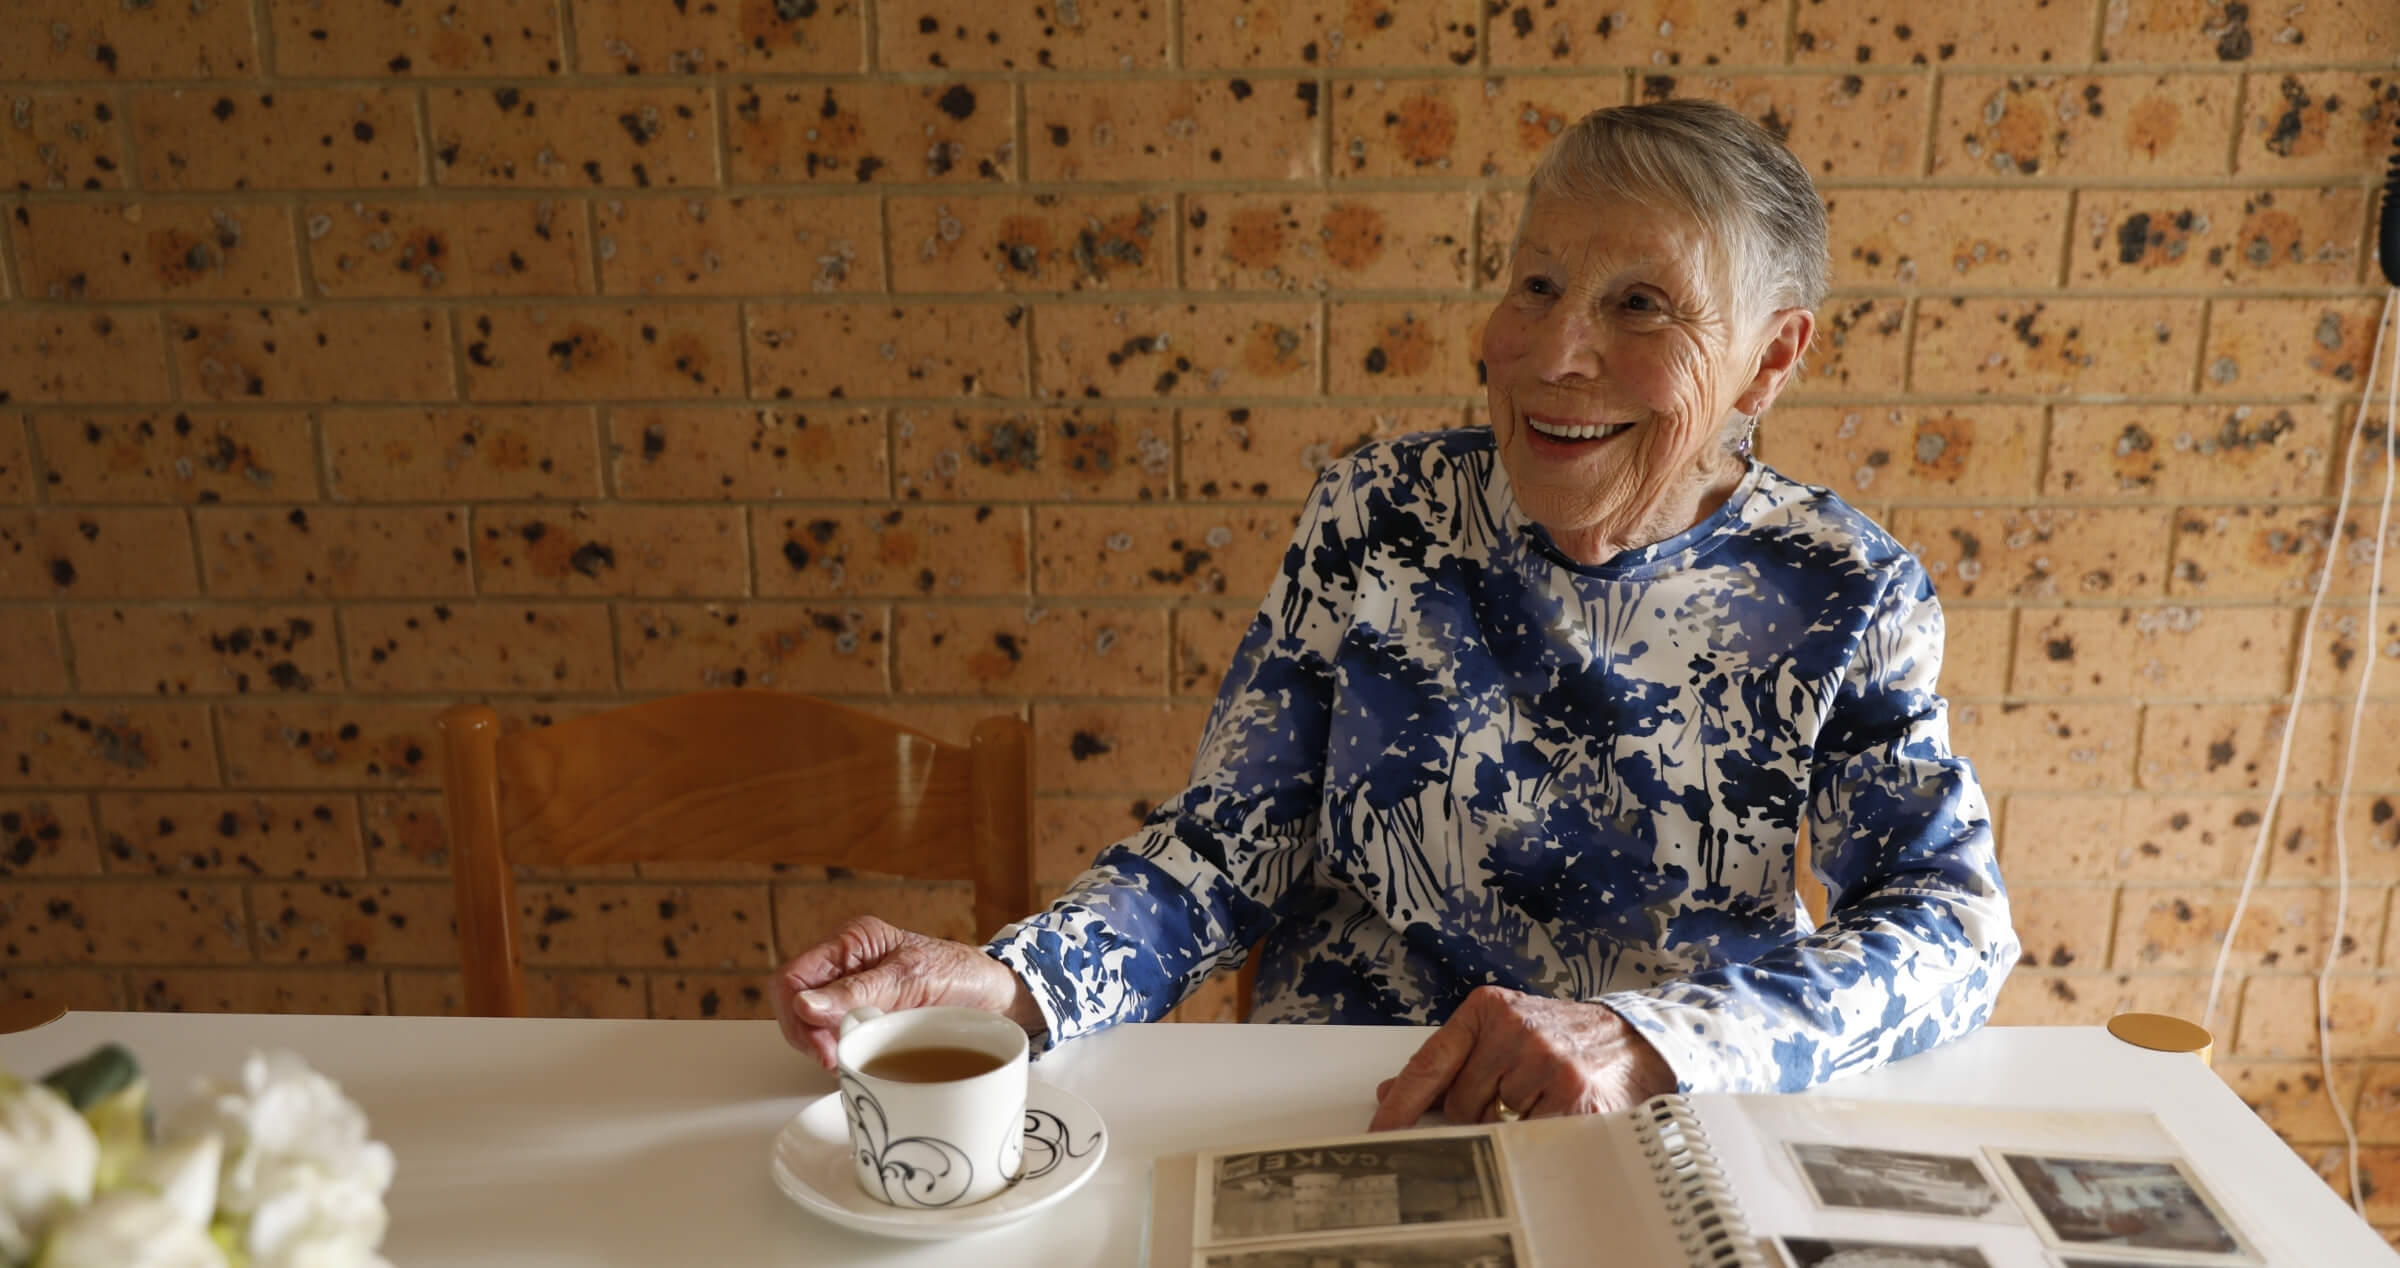 Image of older woman sitting at table drinking cup of tea and looking through photo album